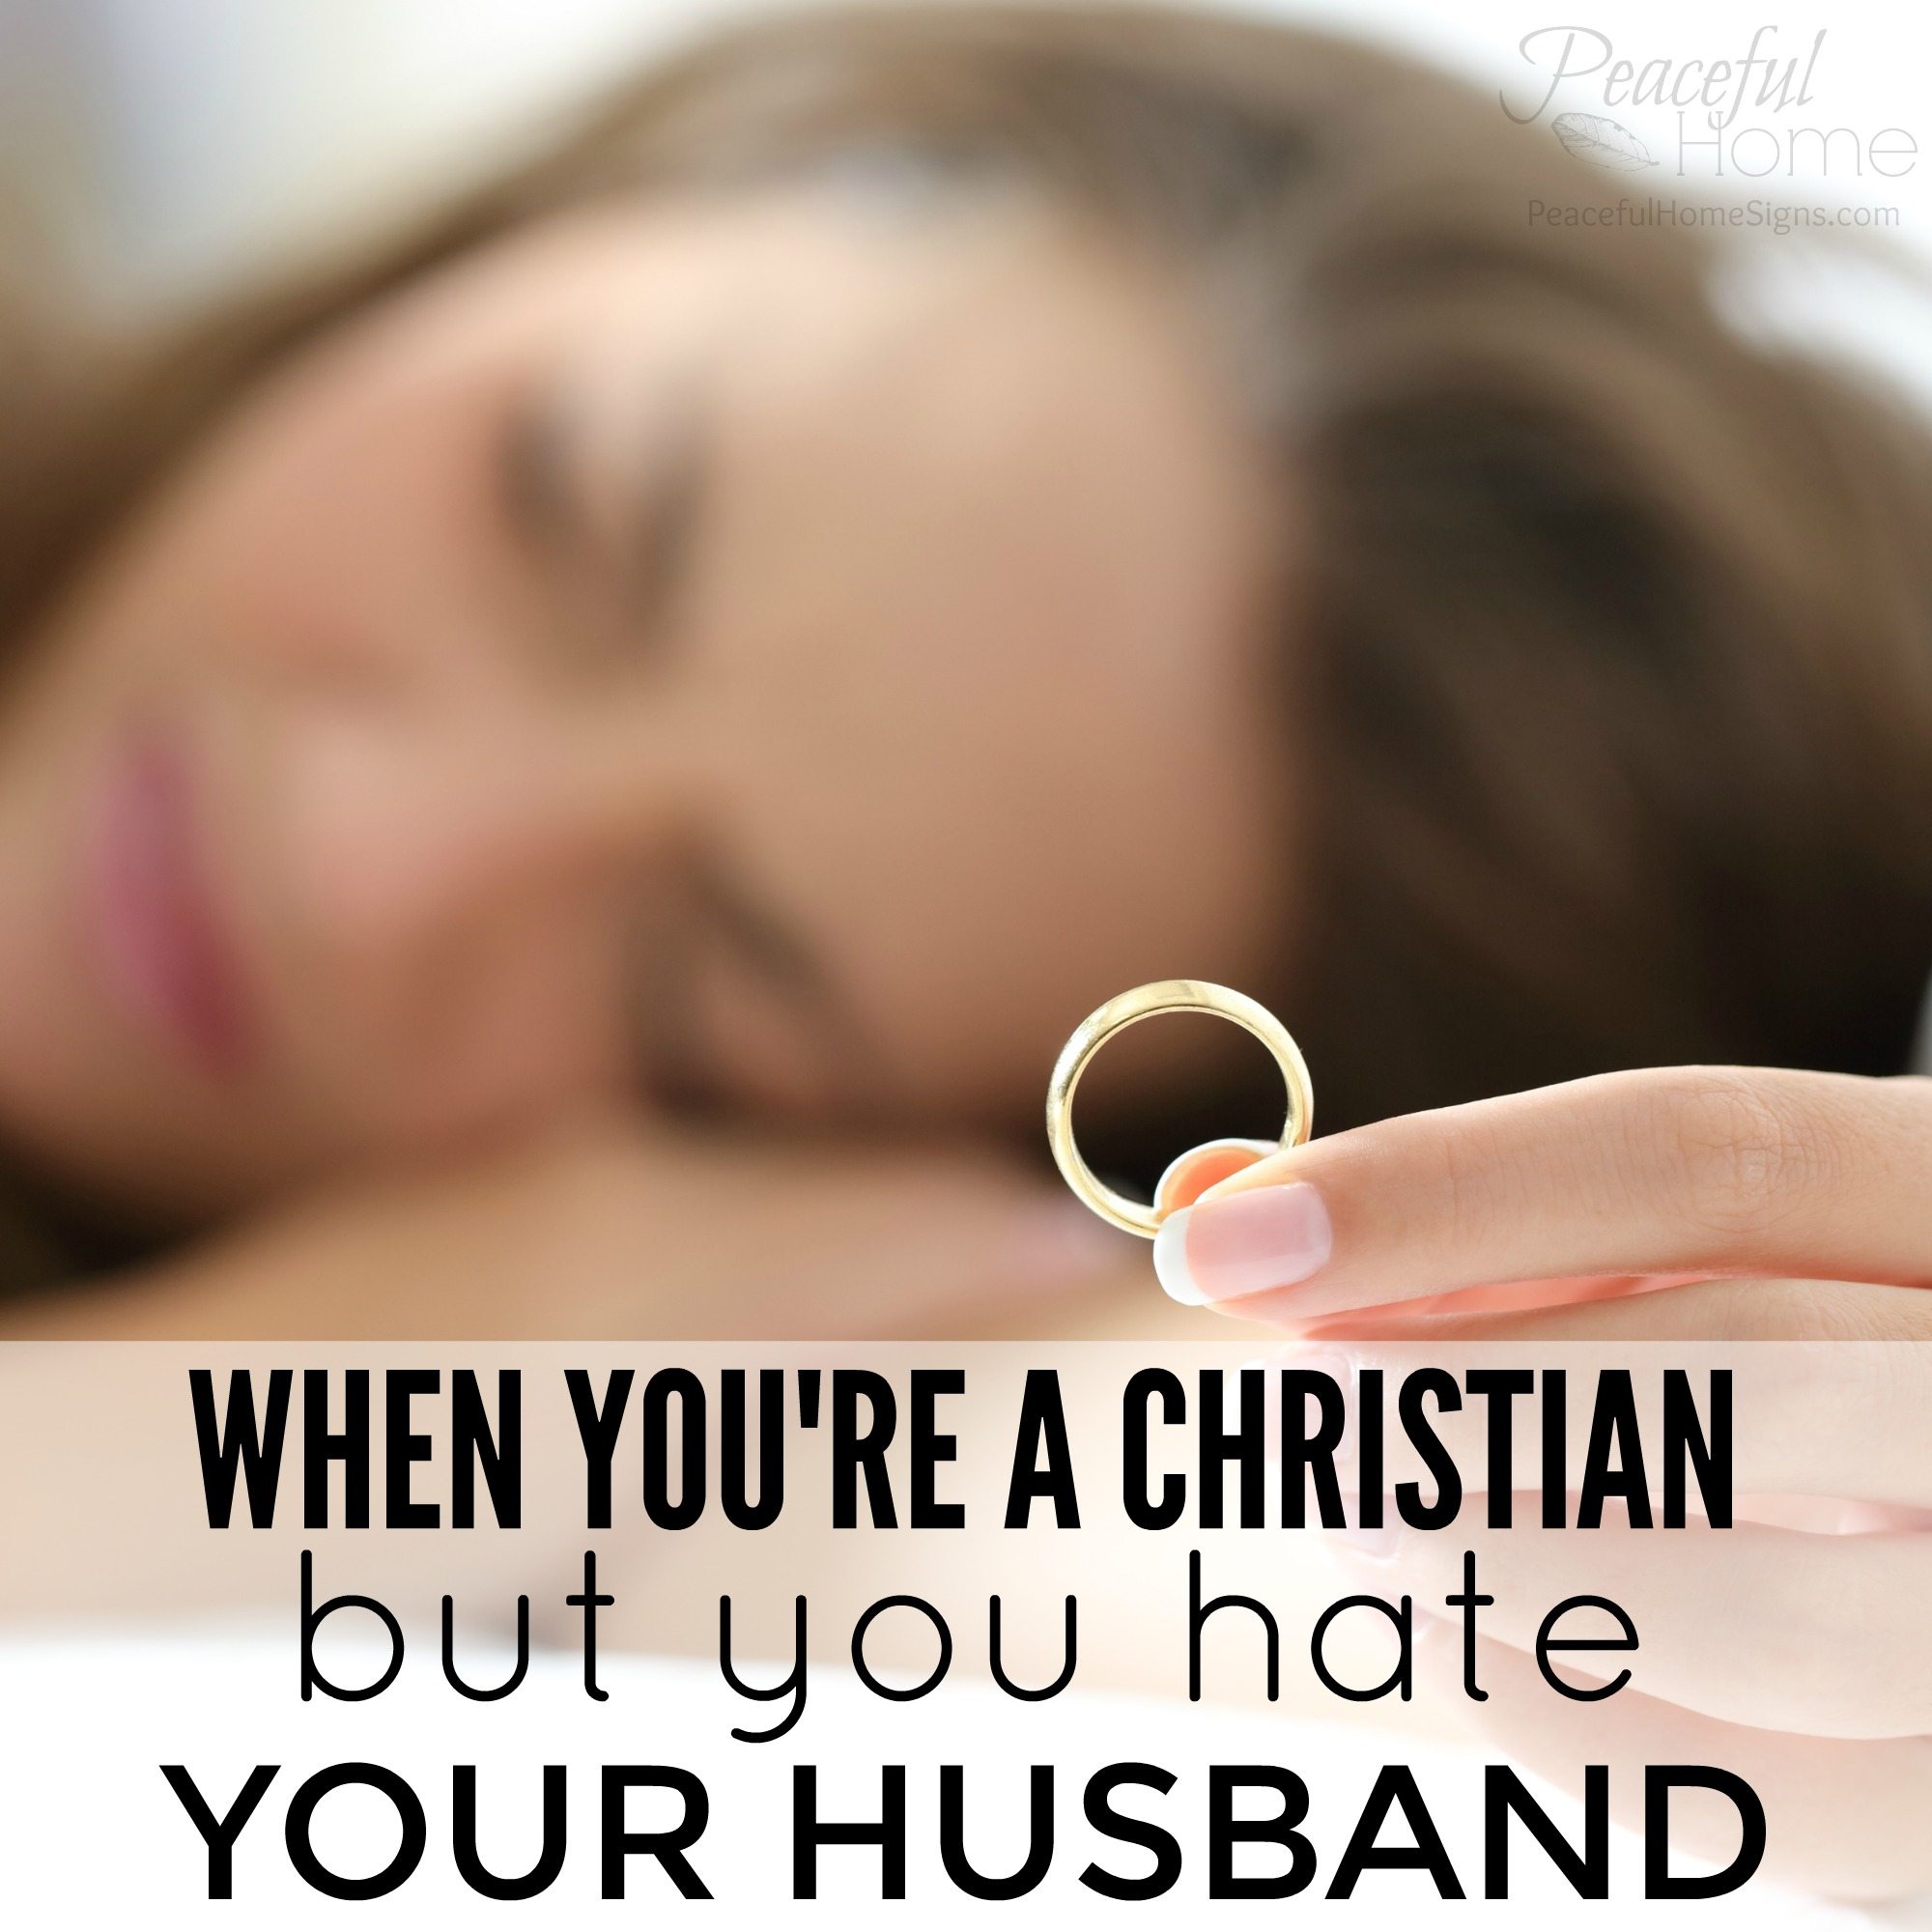 When you’re a Christian but you hate your husband